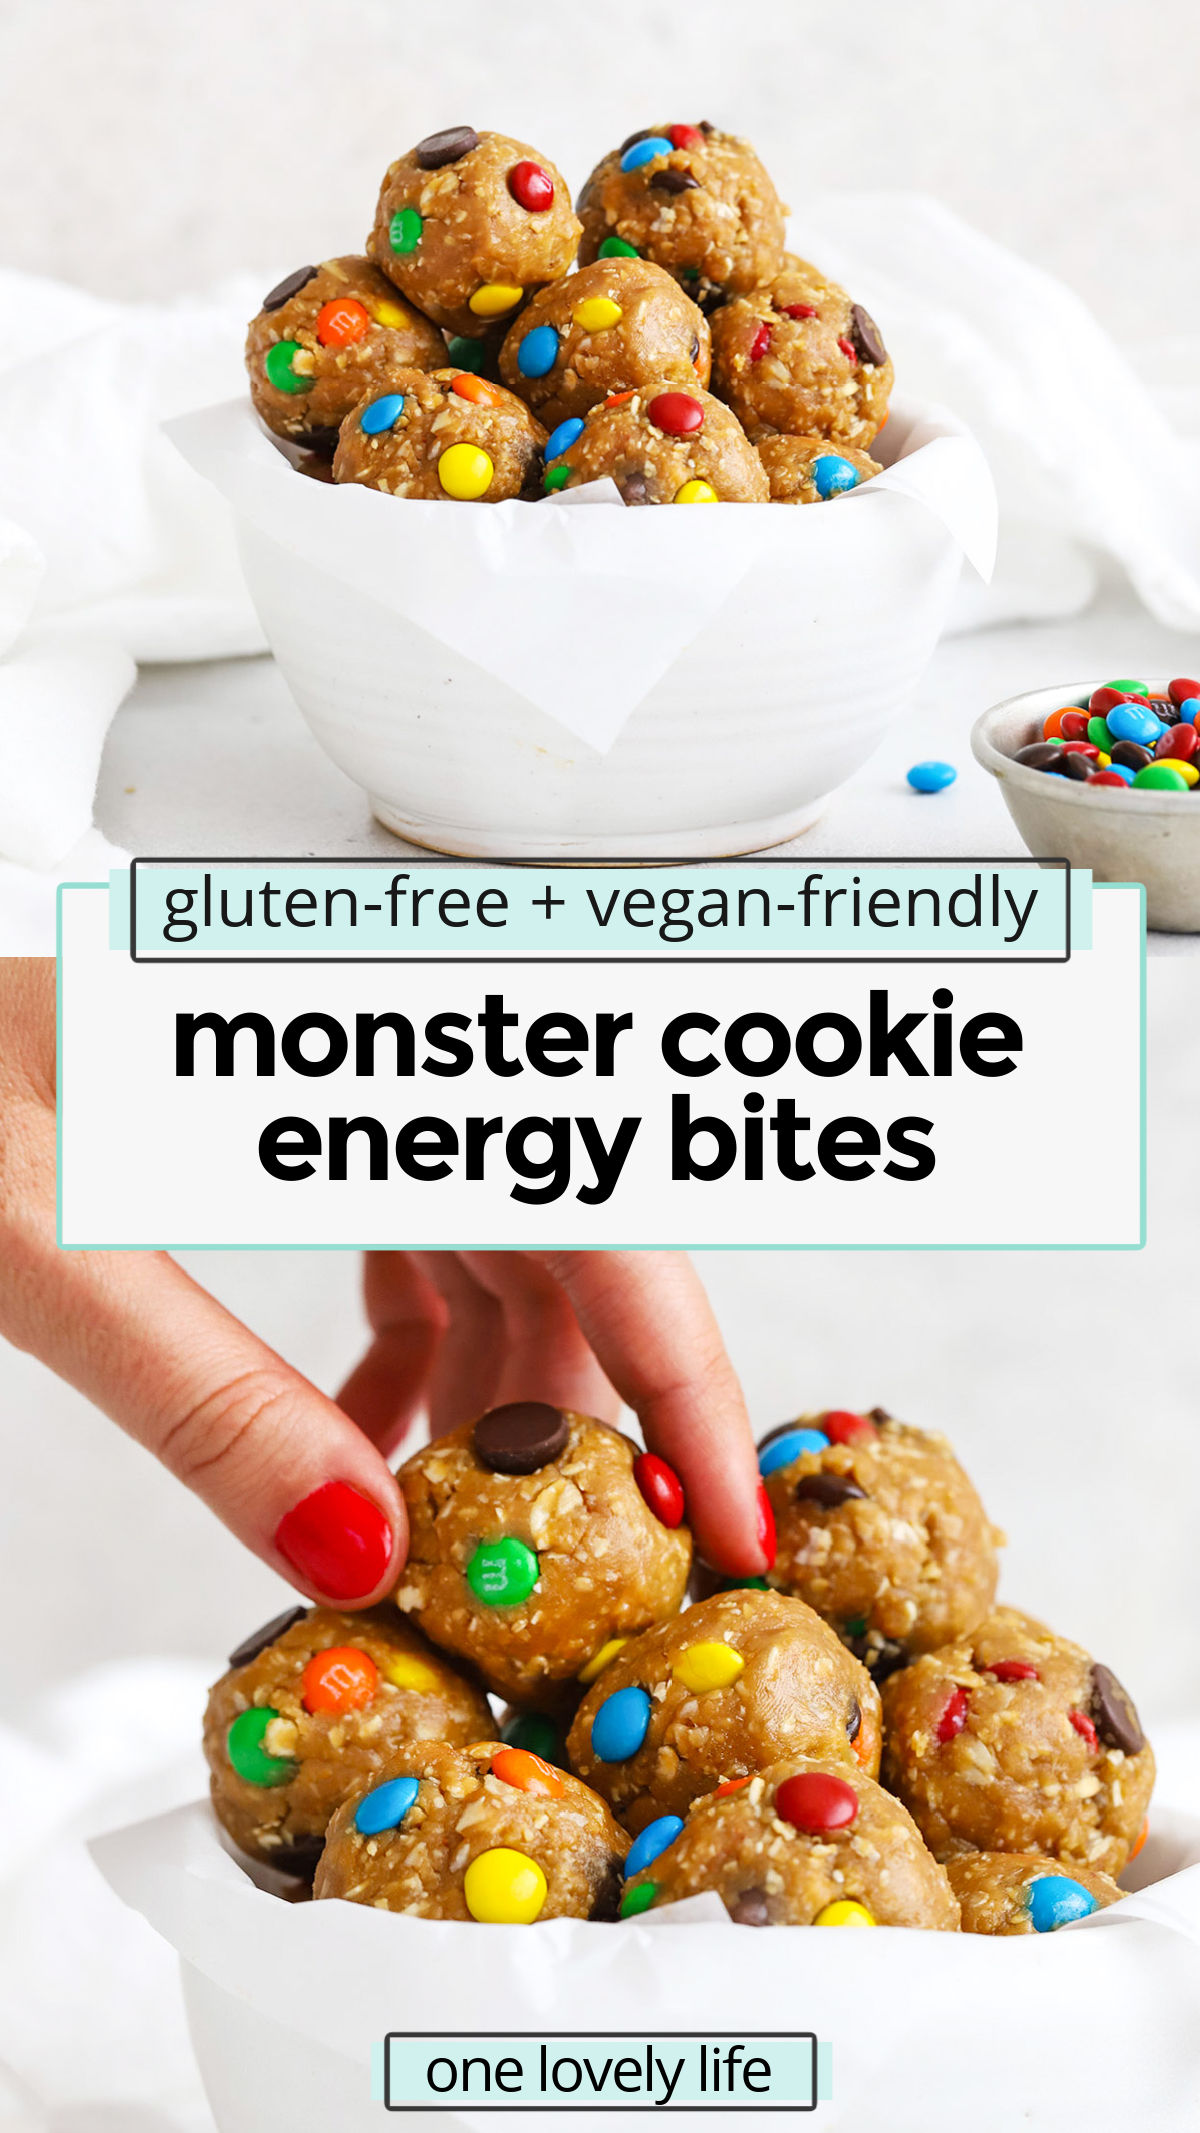 Monster Cookie Energy Bites - These peanut butter oatmeal energy bites made with chocolate chips and chocolate candies make for a fun, easy treat! (Gluten-Free, Vegan-Friendly) / m&m energy bites / No Bake Monster Cookie Energy Bites / Monster Energy bites / monster energy balls / No Bake Monster Cookie Energy Balls / Healthy Monster Cookie Energy Bites / Healthy Snack / Healthy After School Snack / Meal Prep Snack / Healthy Treat / Gluten Free Snack / Vegan Snack